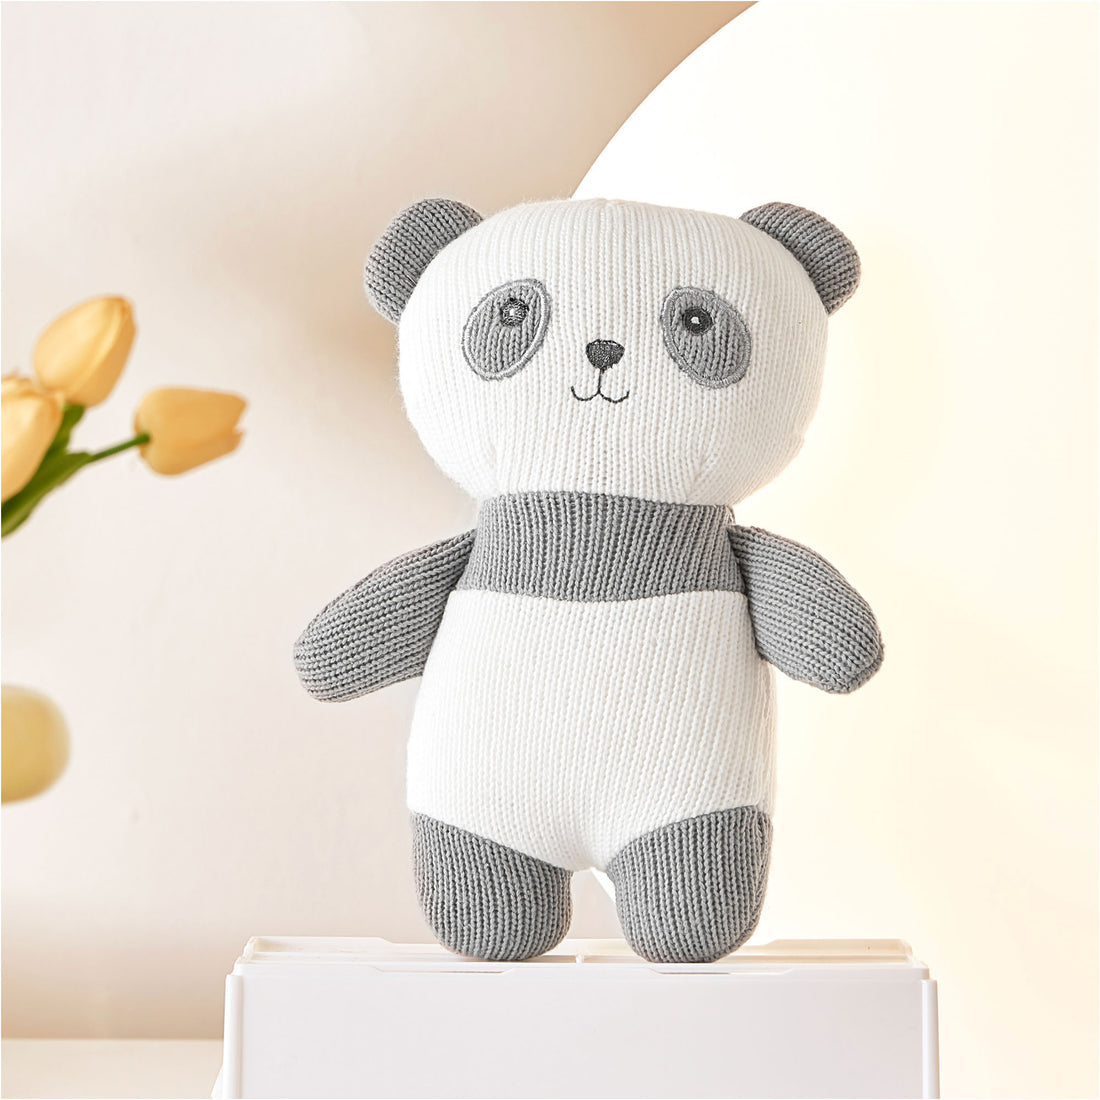 A stuffed panda bear sitting on a white shelf. The panda bear is black and white and made of soft material. It has black eyes, nose, and mouth.